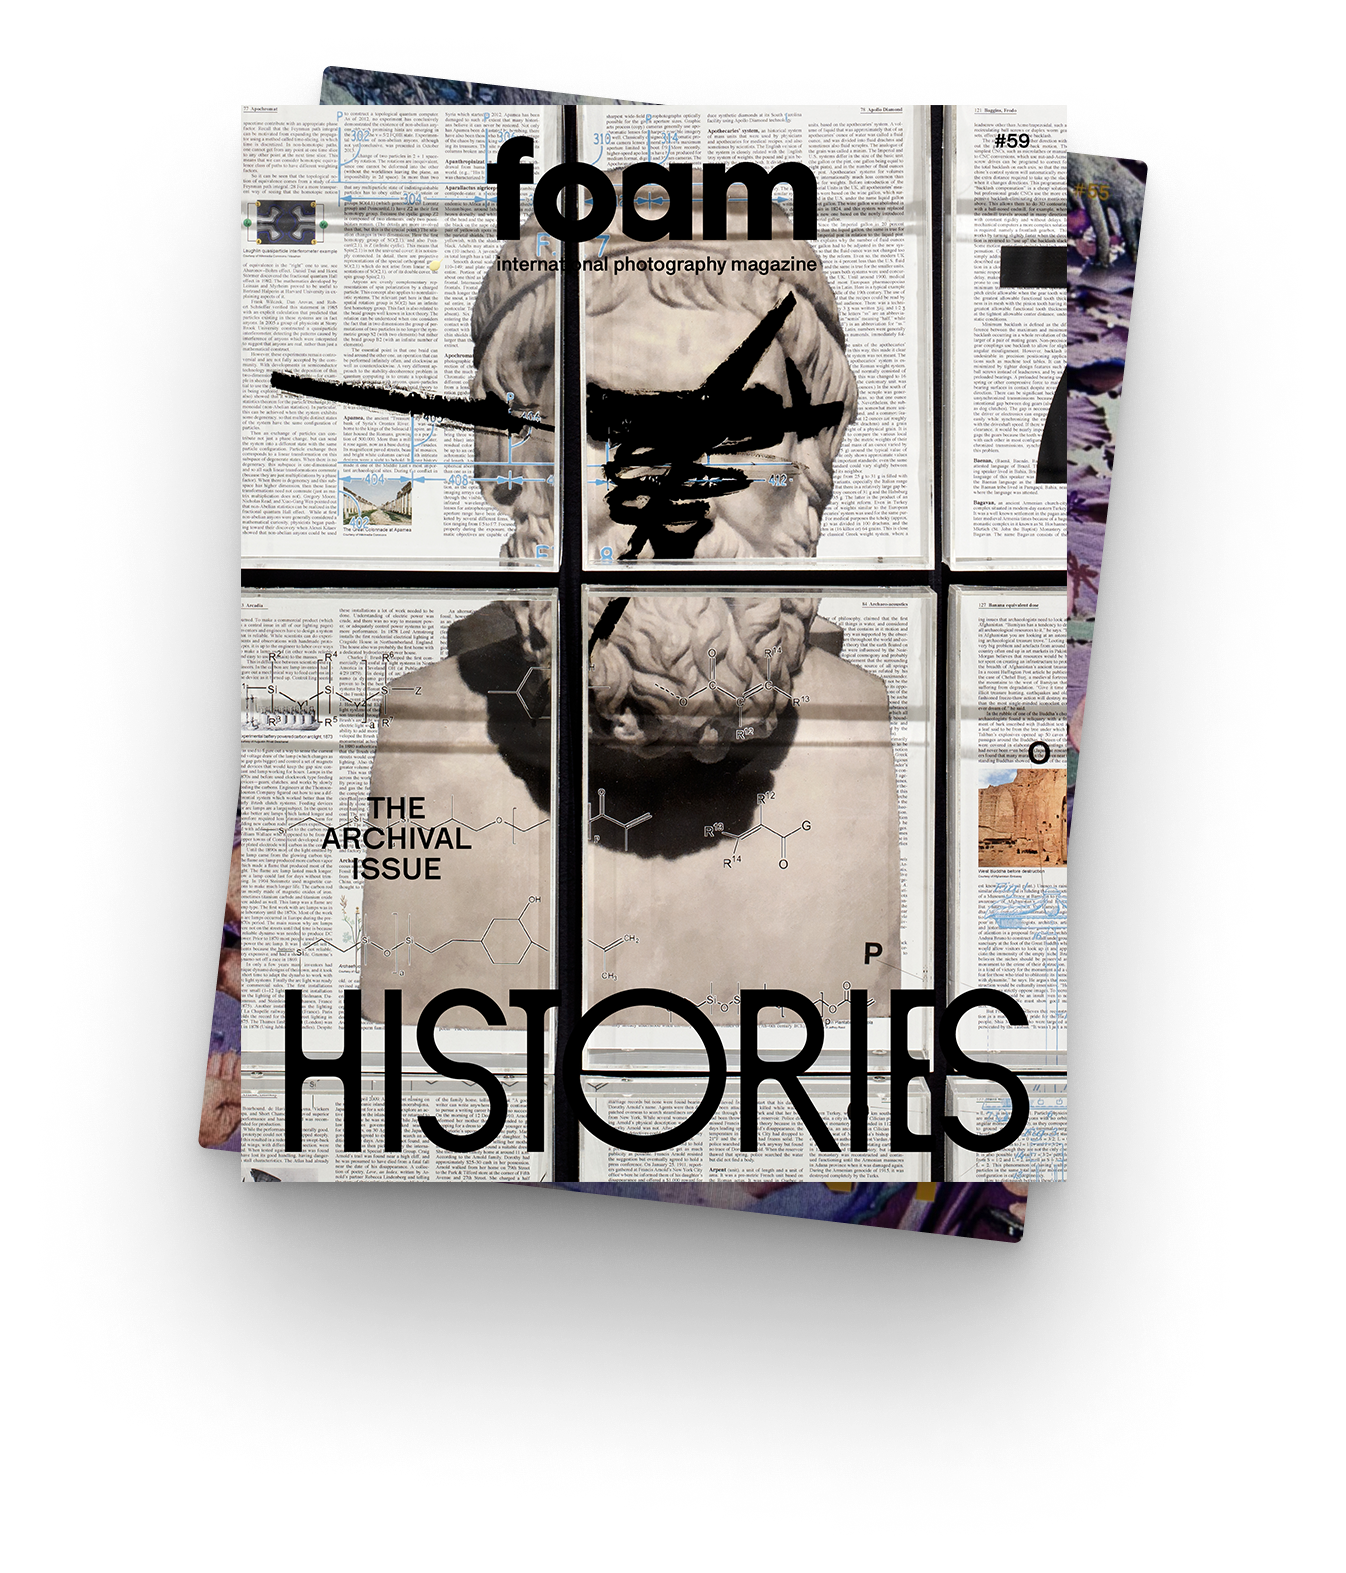 Foam Magazine - Histories: The Archival issue